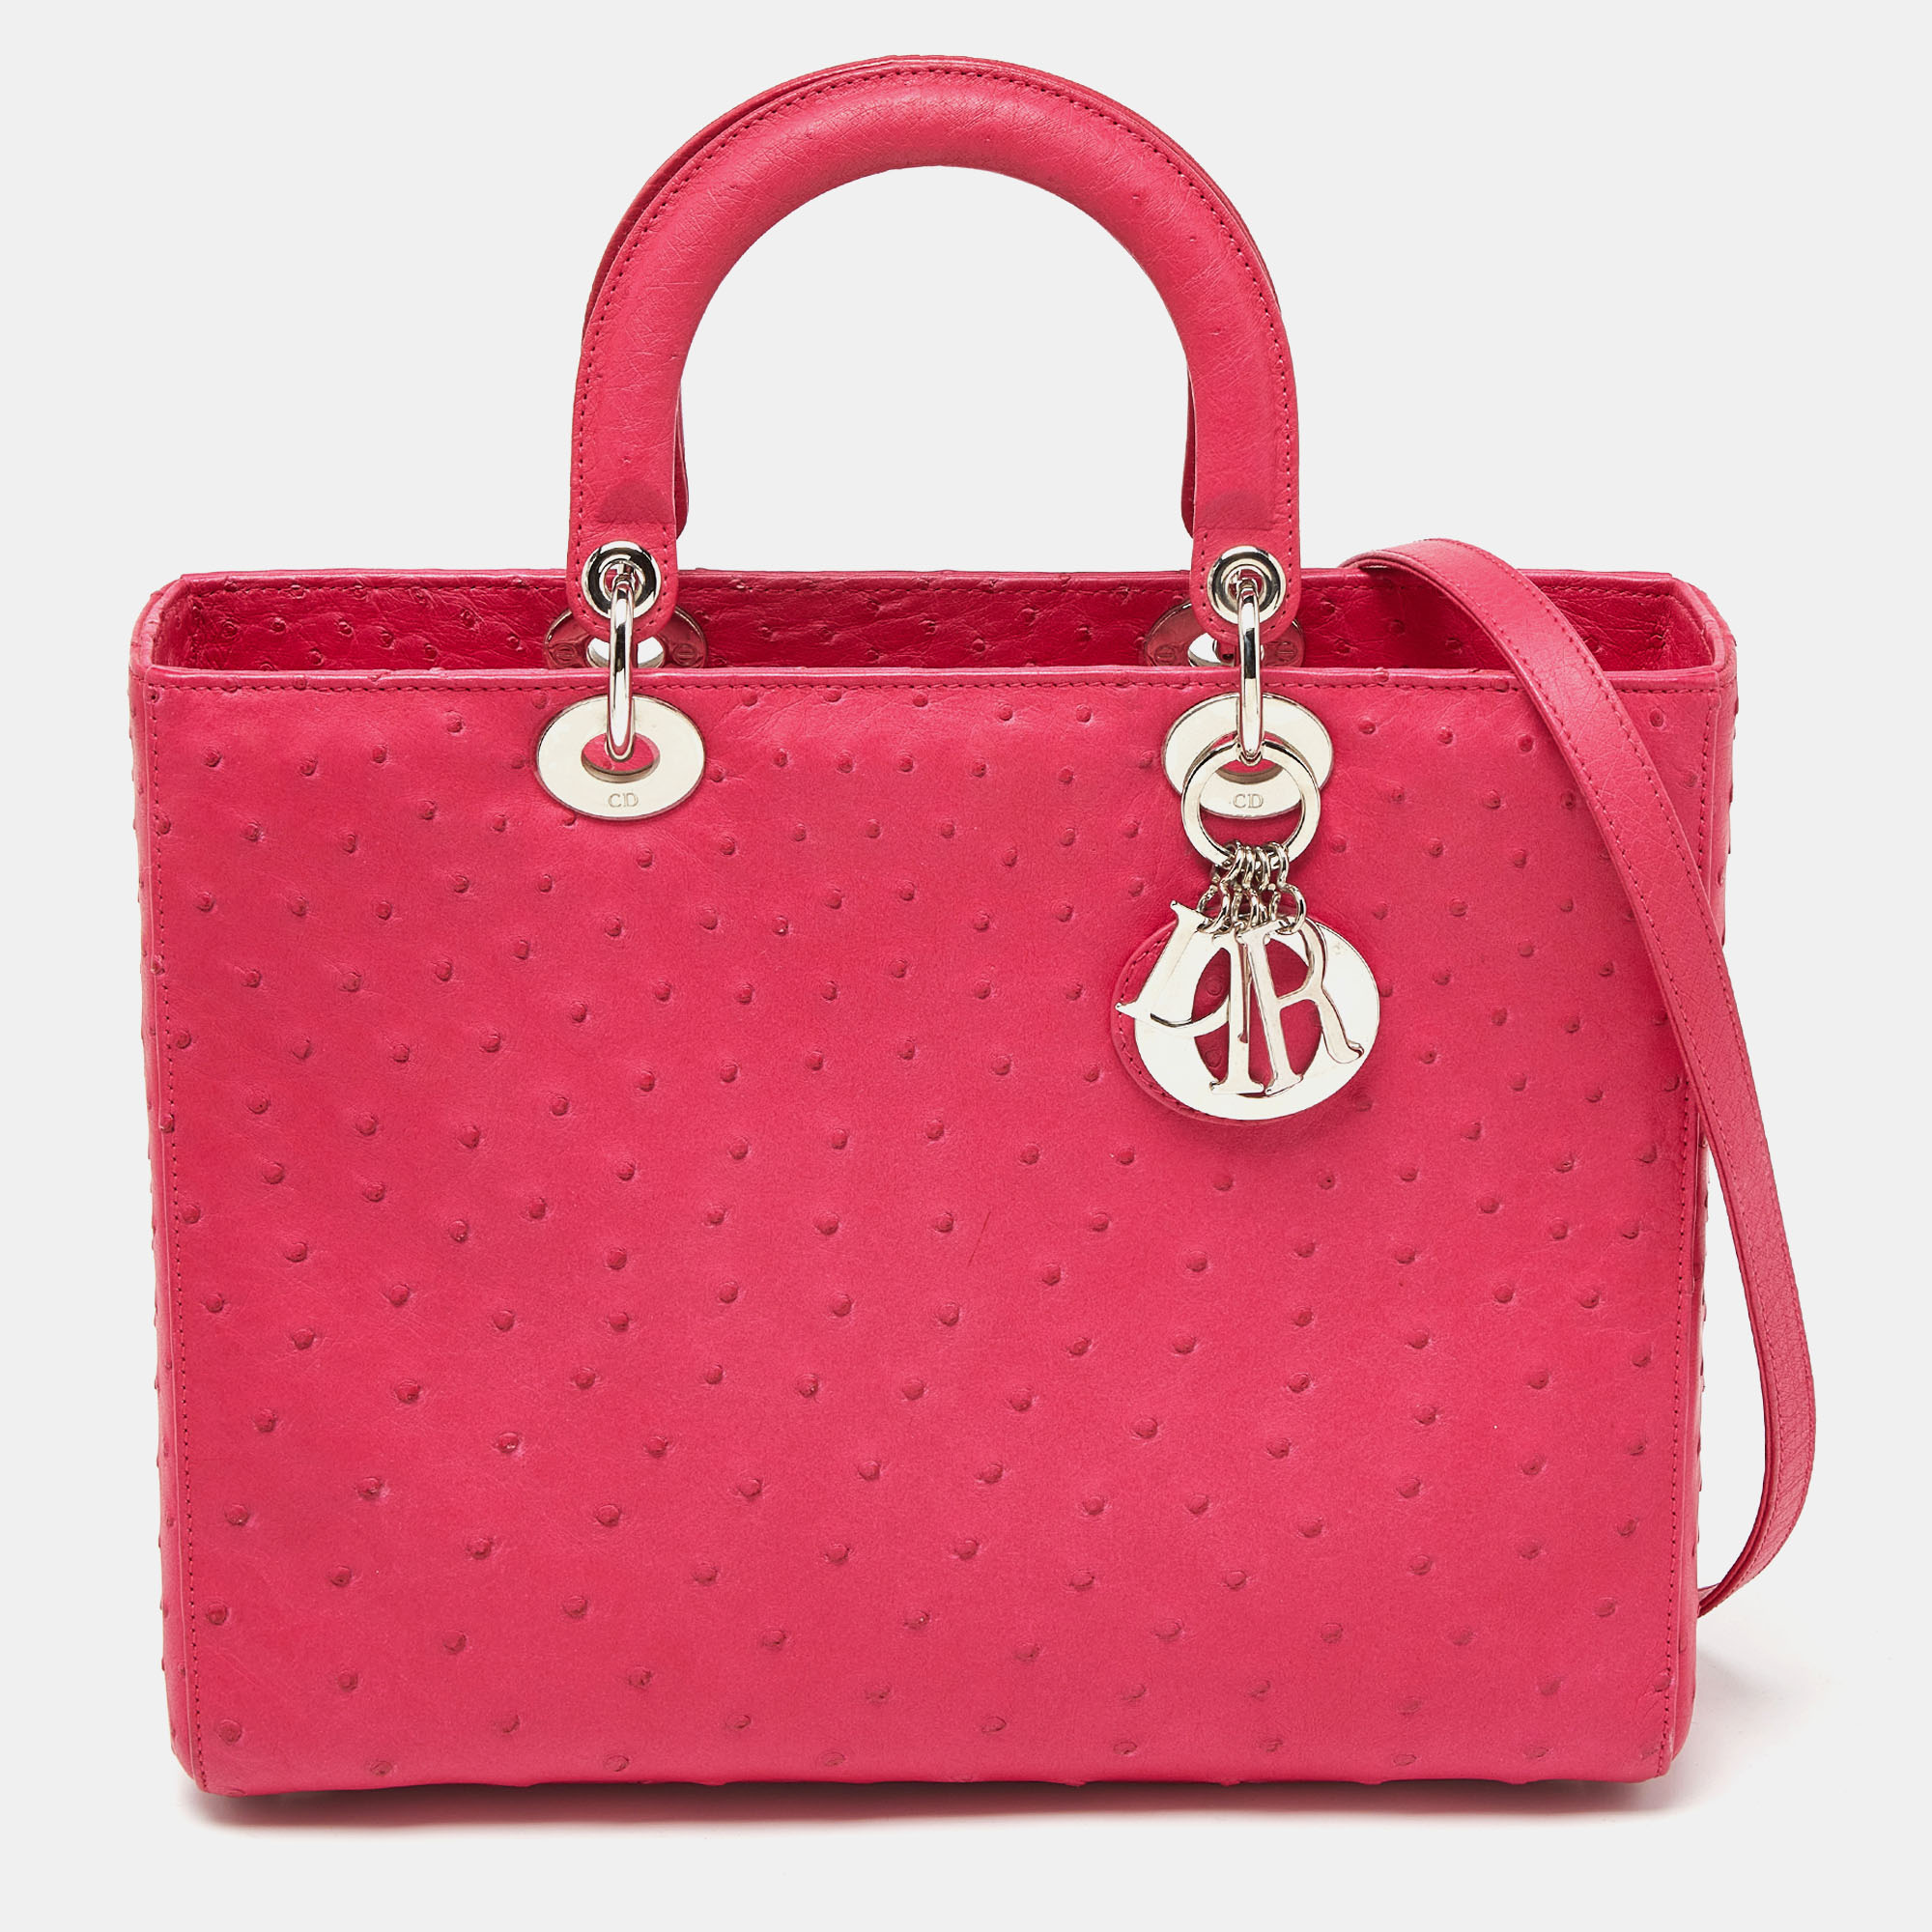 Dior pink ostrich leather large lady dior tote